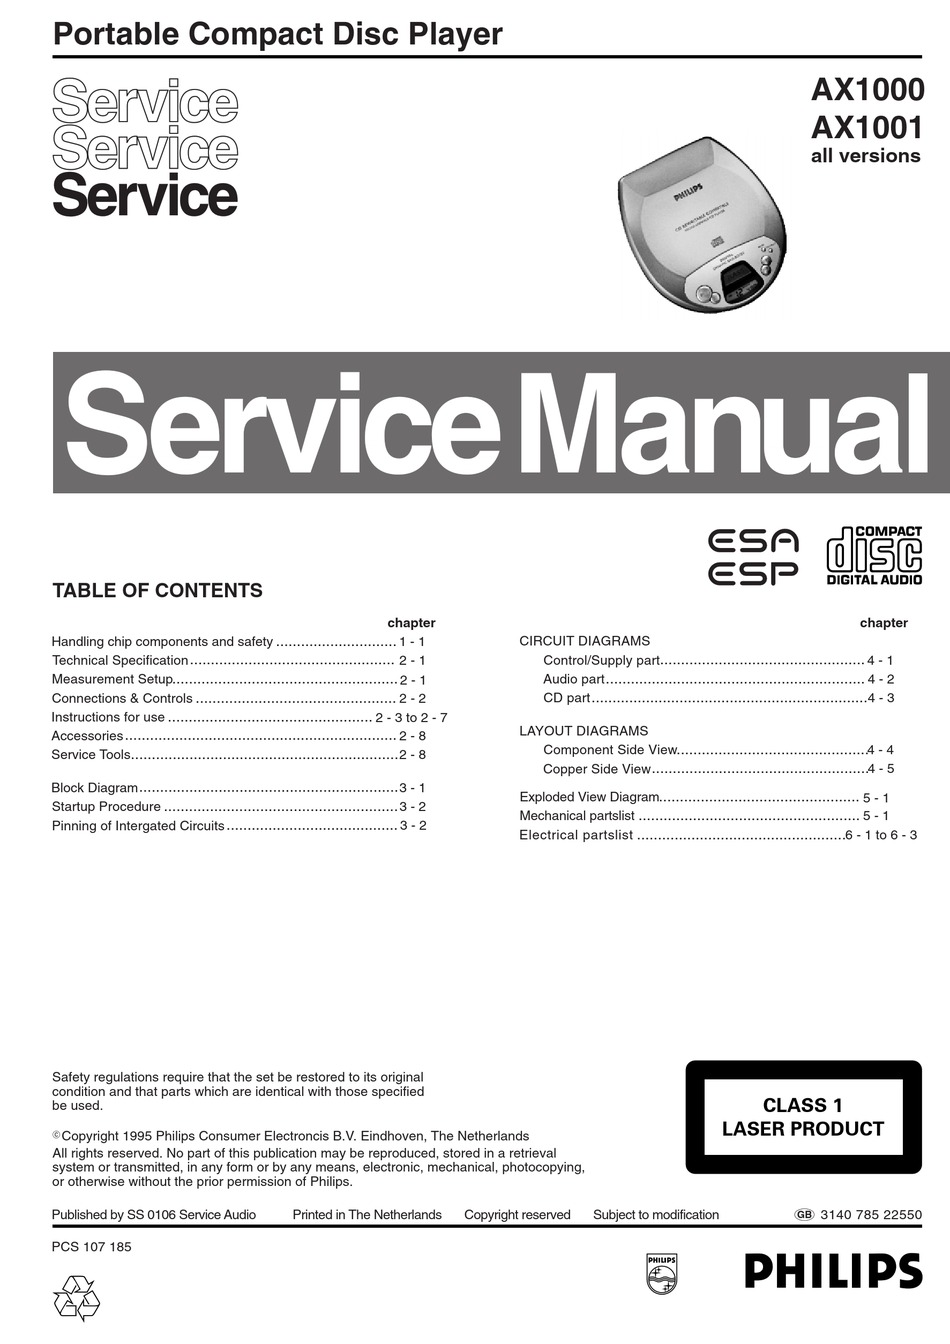 Service manual philips. Philips ax1001. Service manual Philips shc8535. Service manual Philips shb9100. TMX-r1000 service manual.